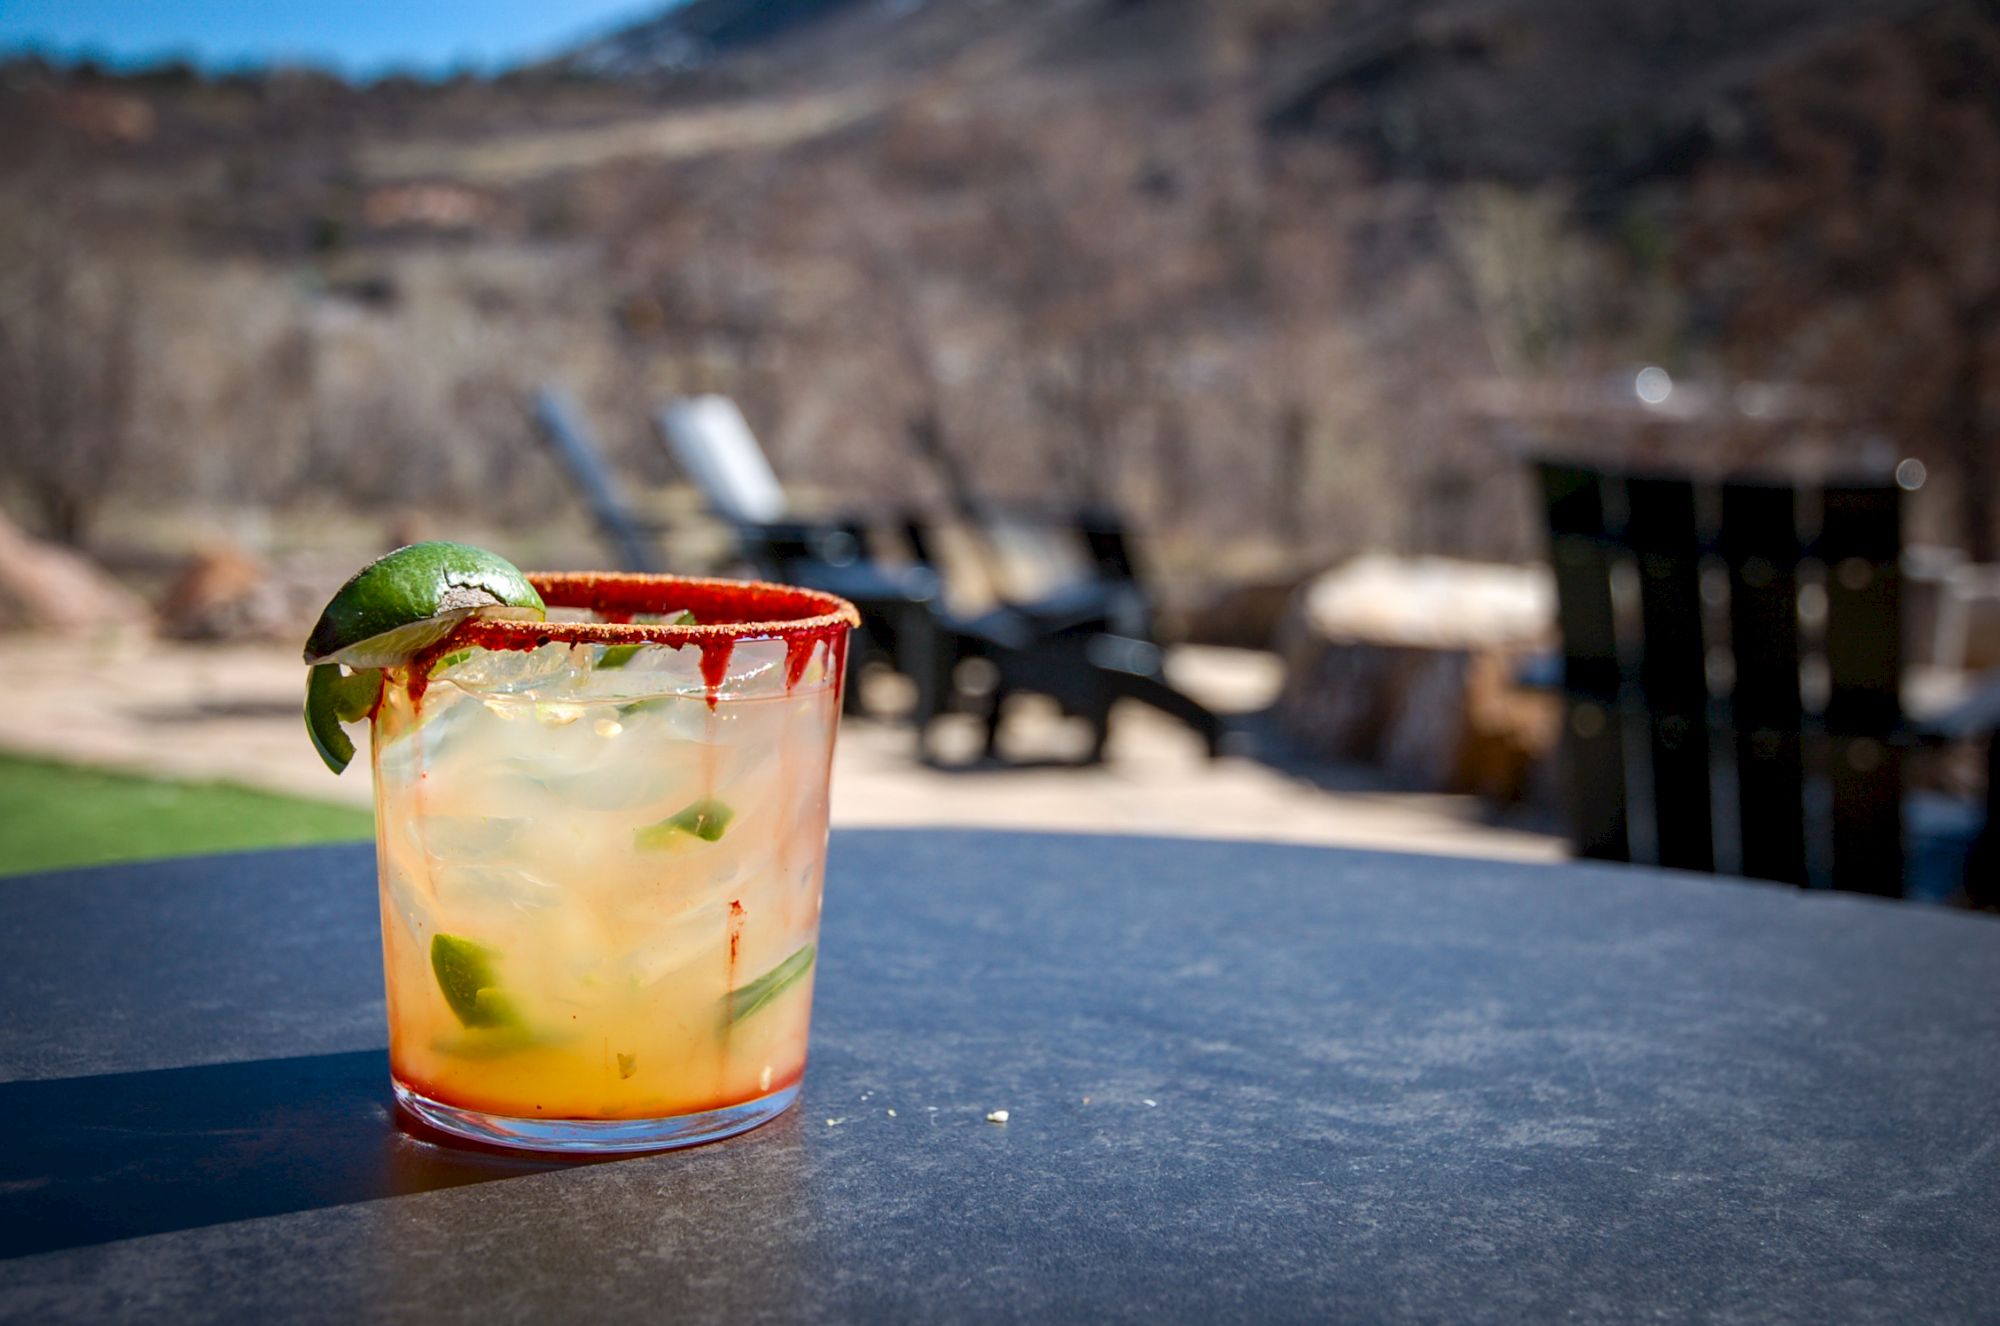 A cocktail garnished with lime and a chili-rimmed glass sits on a table outside with an out-of-focus scenic background and empty chairs.